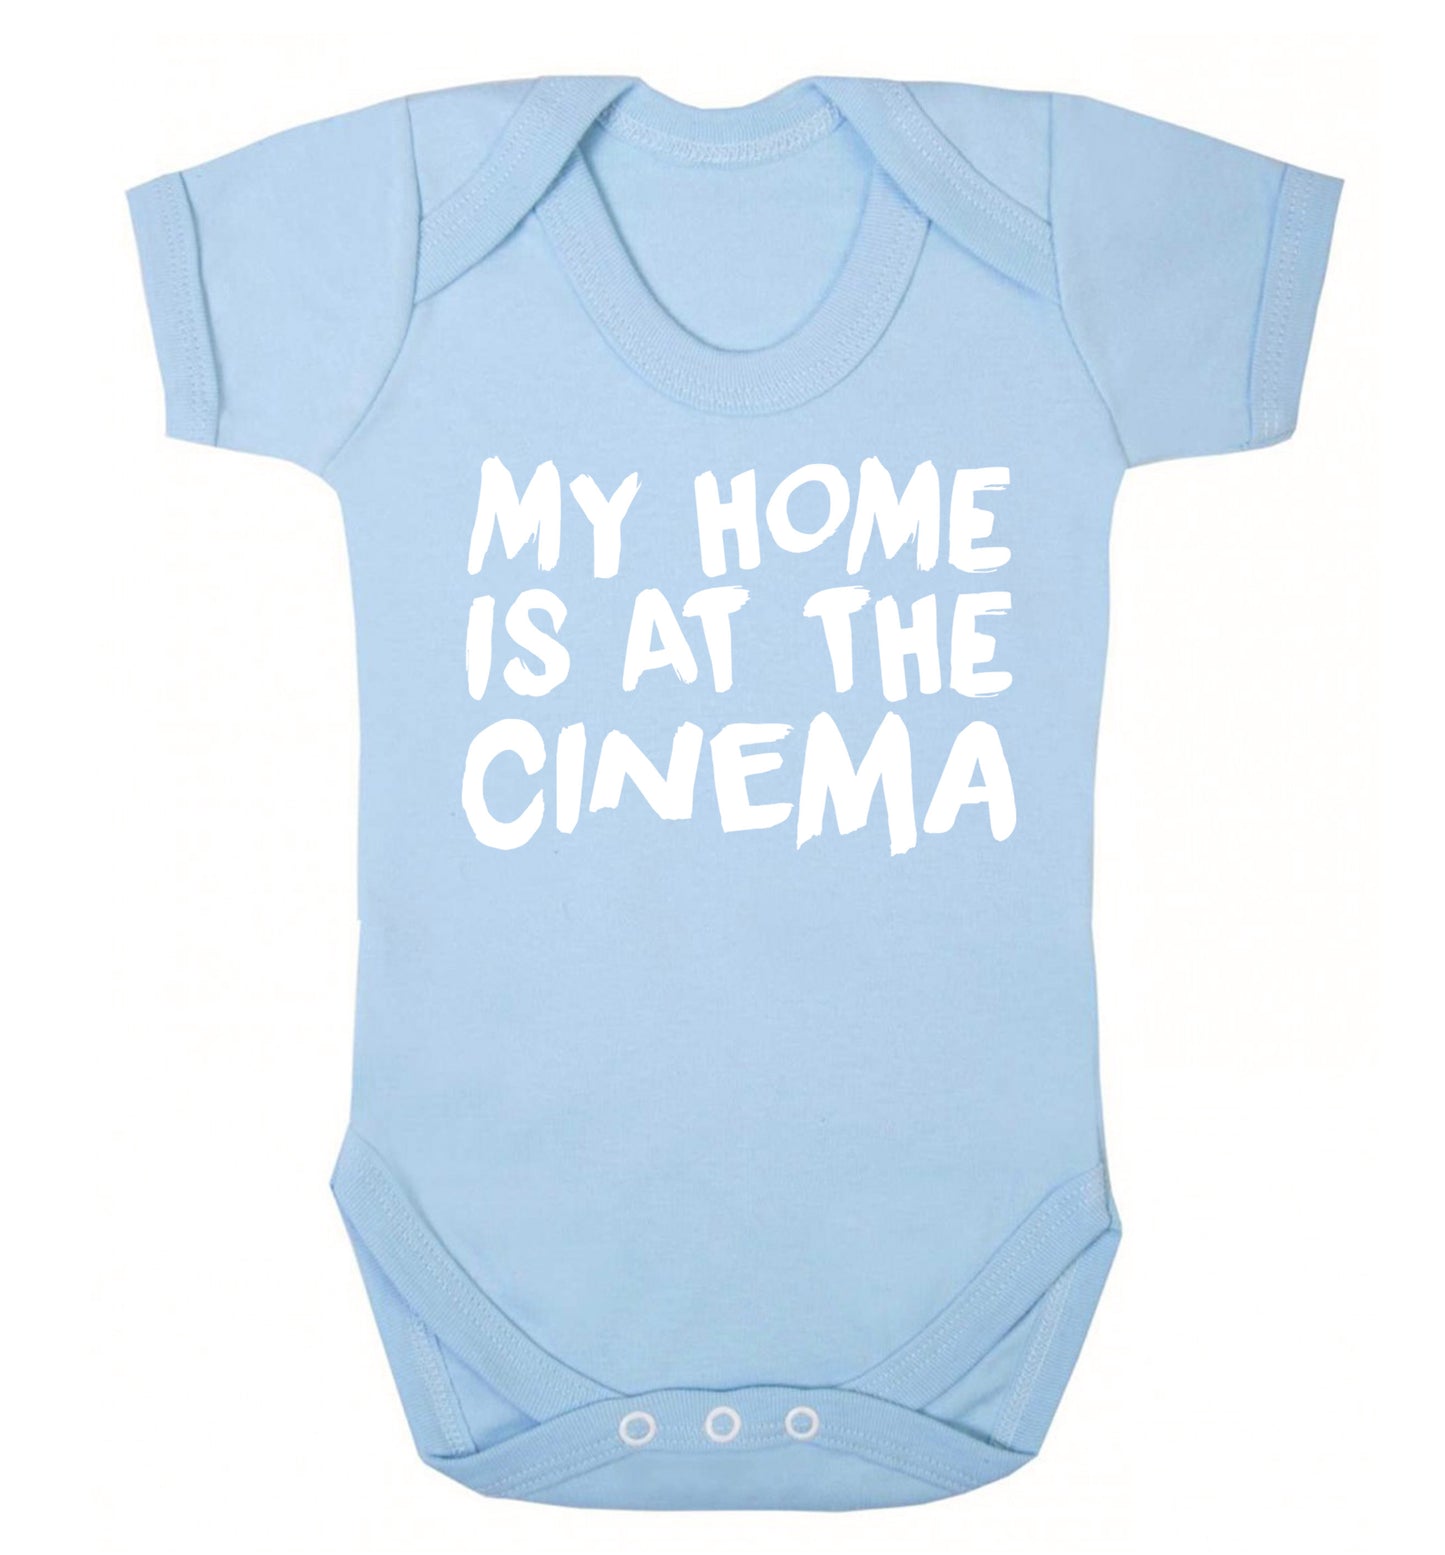 My home is at the cinema Baby Vest pale blue 18-24 months